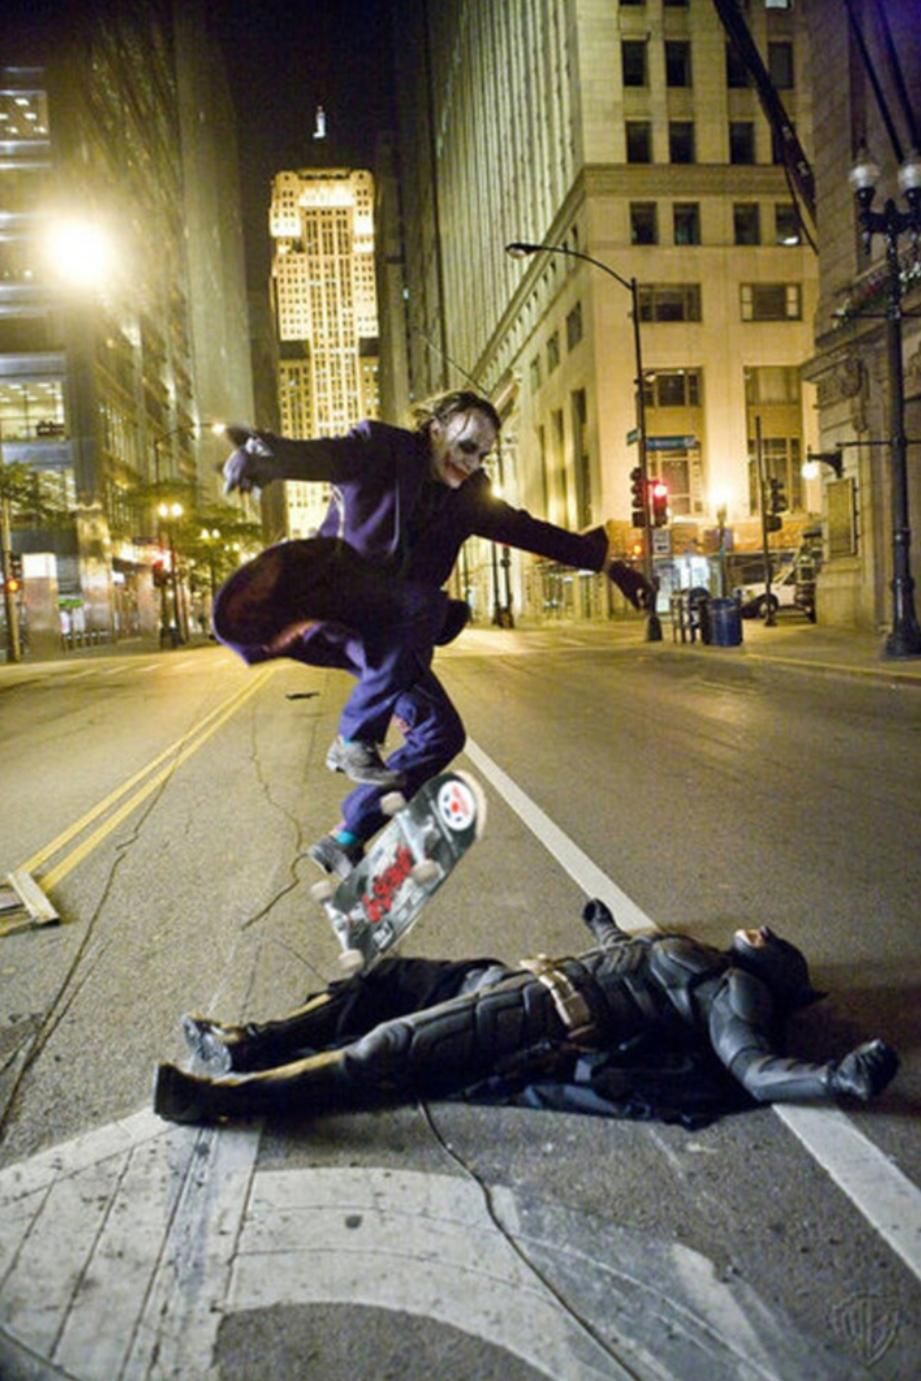 2008. The streets of Gotham. The Joker celebrates defeating his archenemy, Batman, with some sick skate moves.